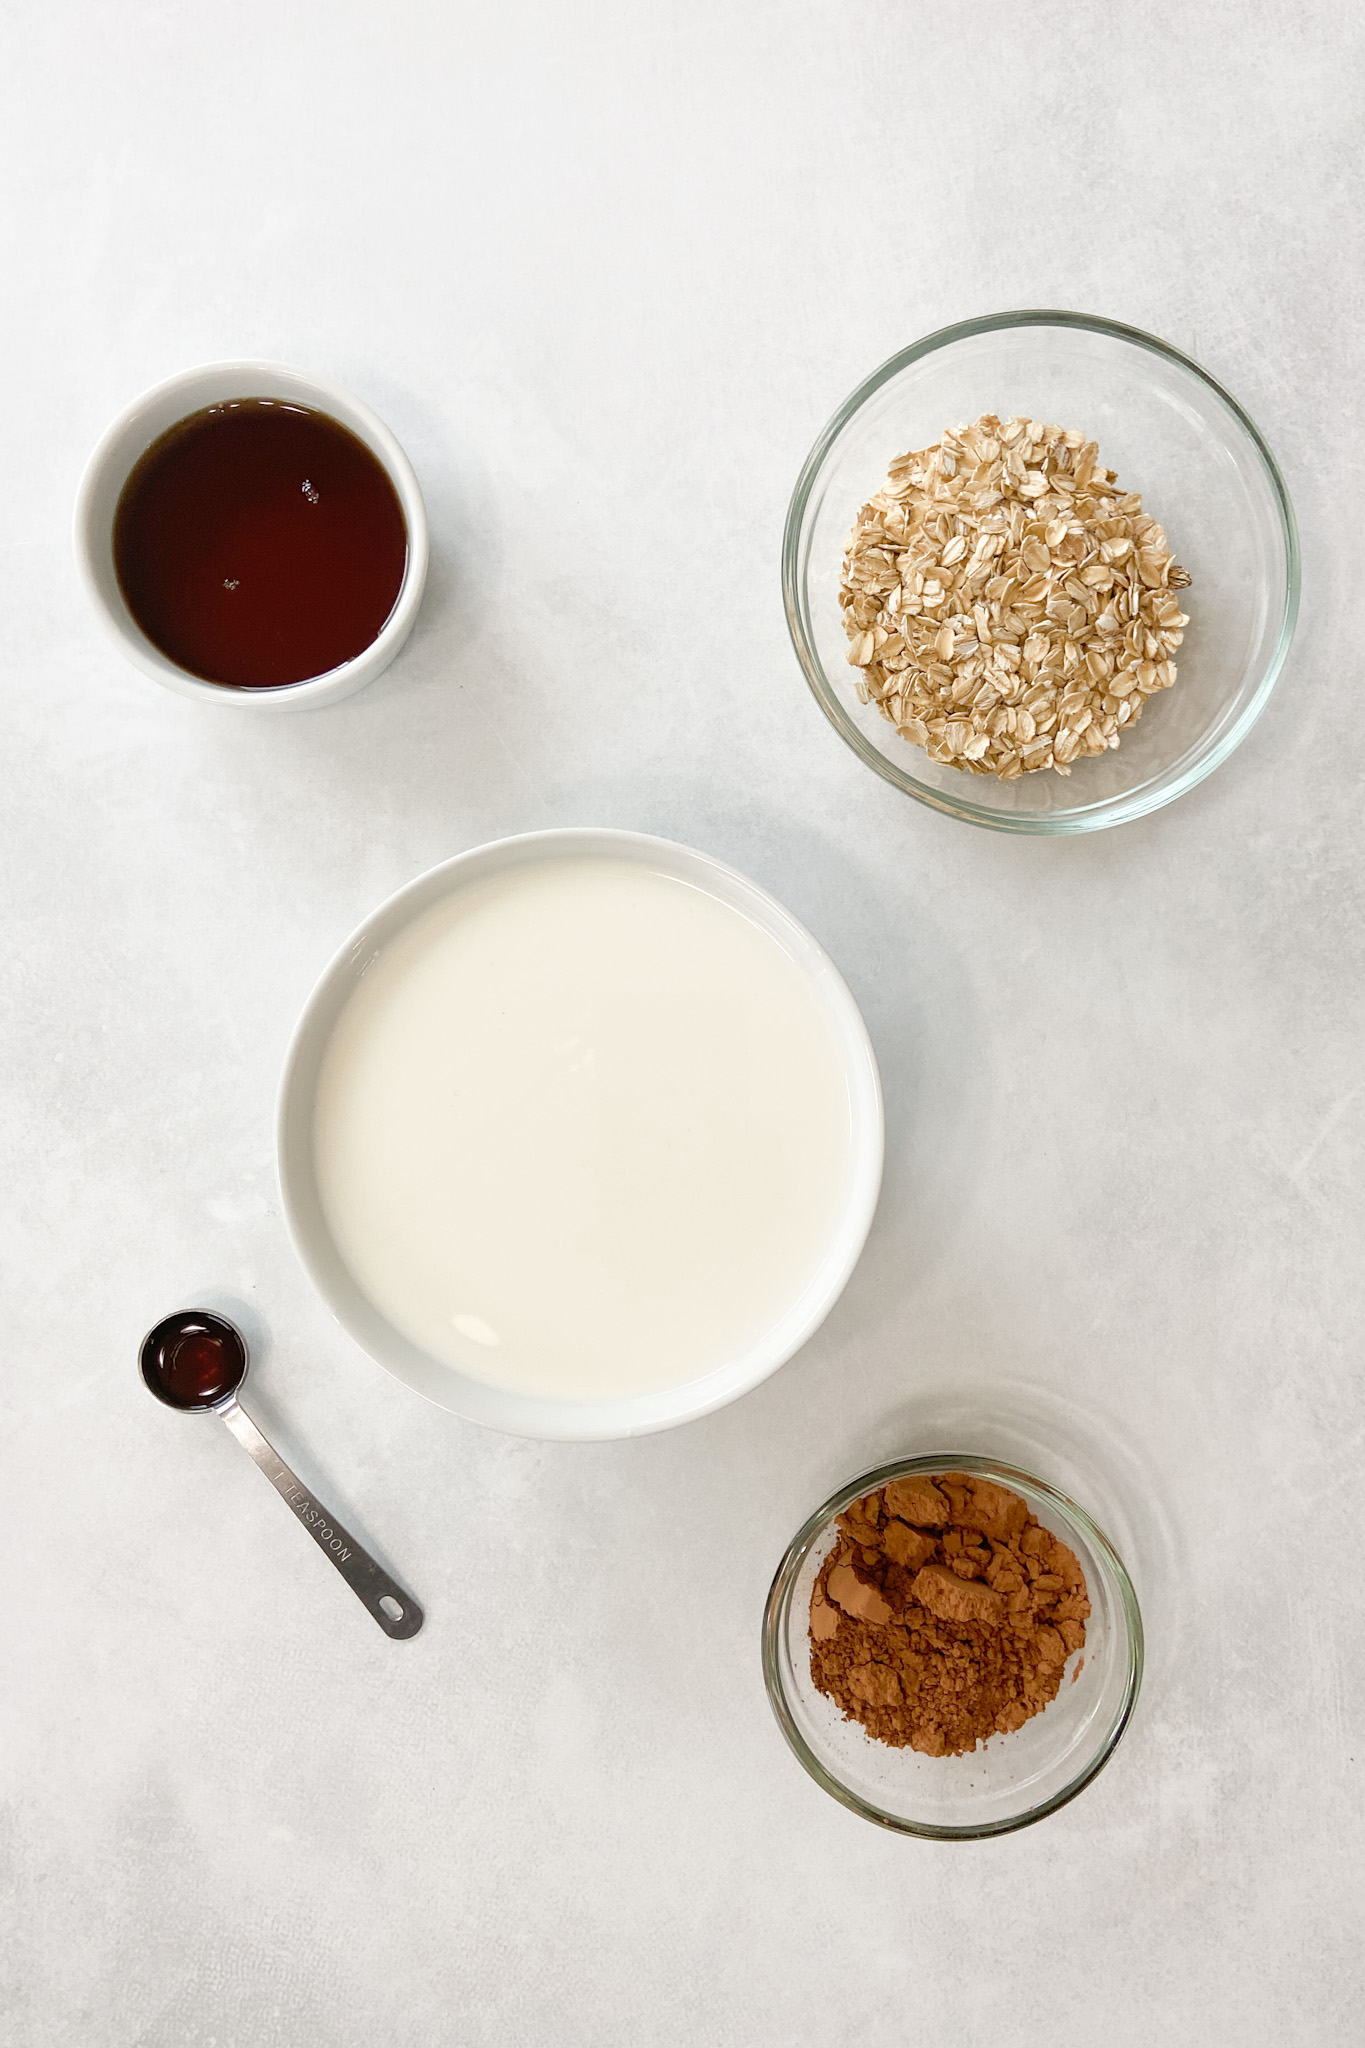 Ingredients to make oatmeal chocolate pudding